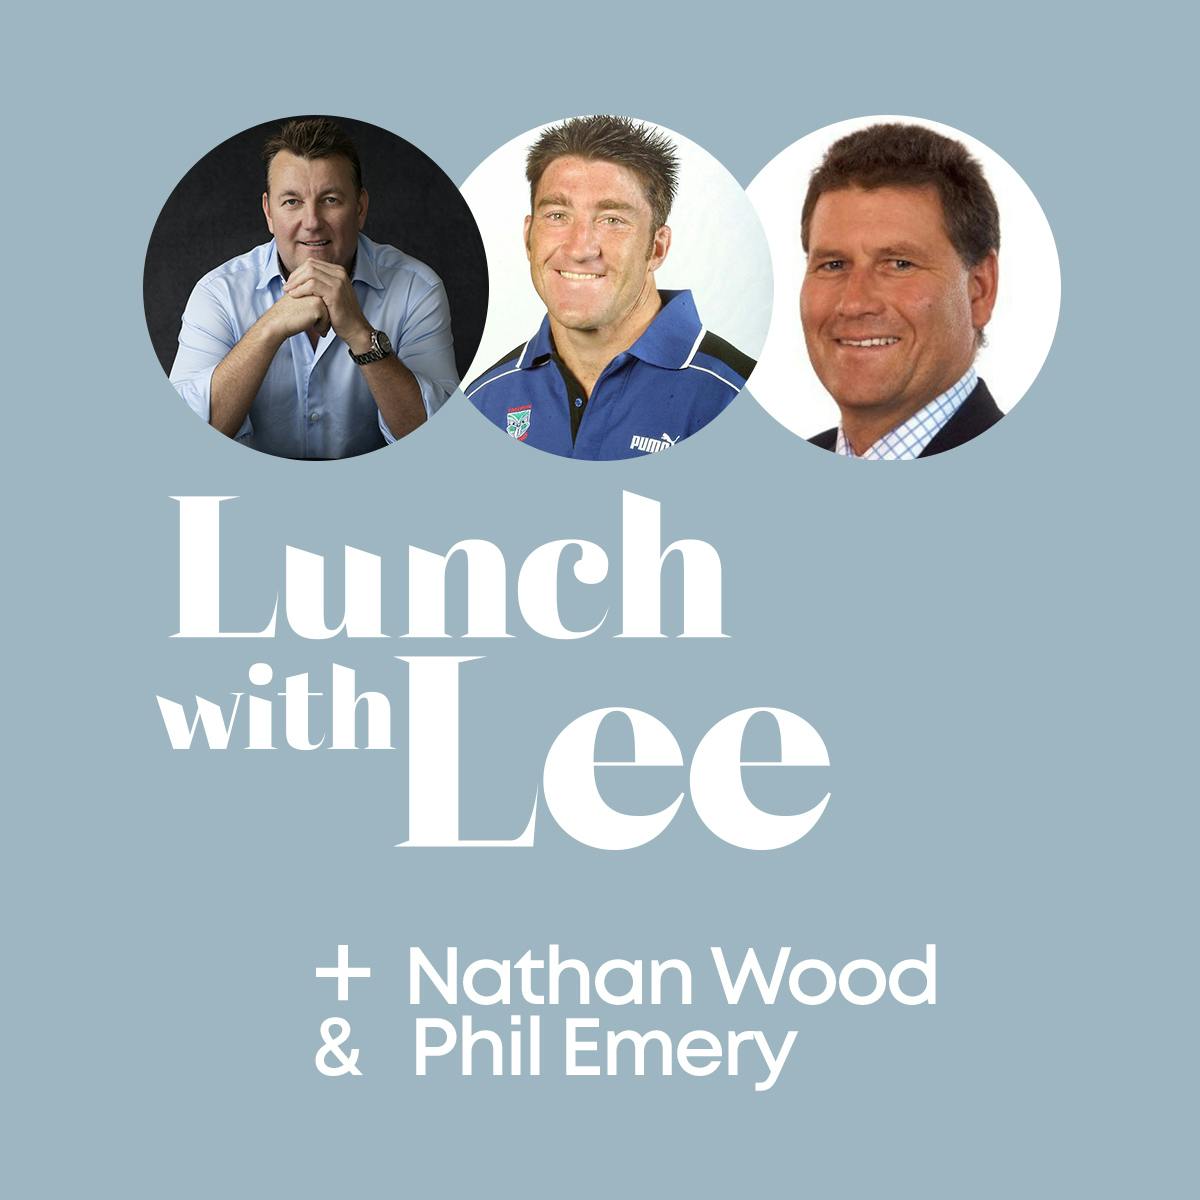 Lunch with Nathan Wood & Phil Emery